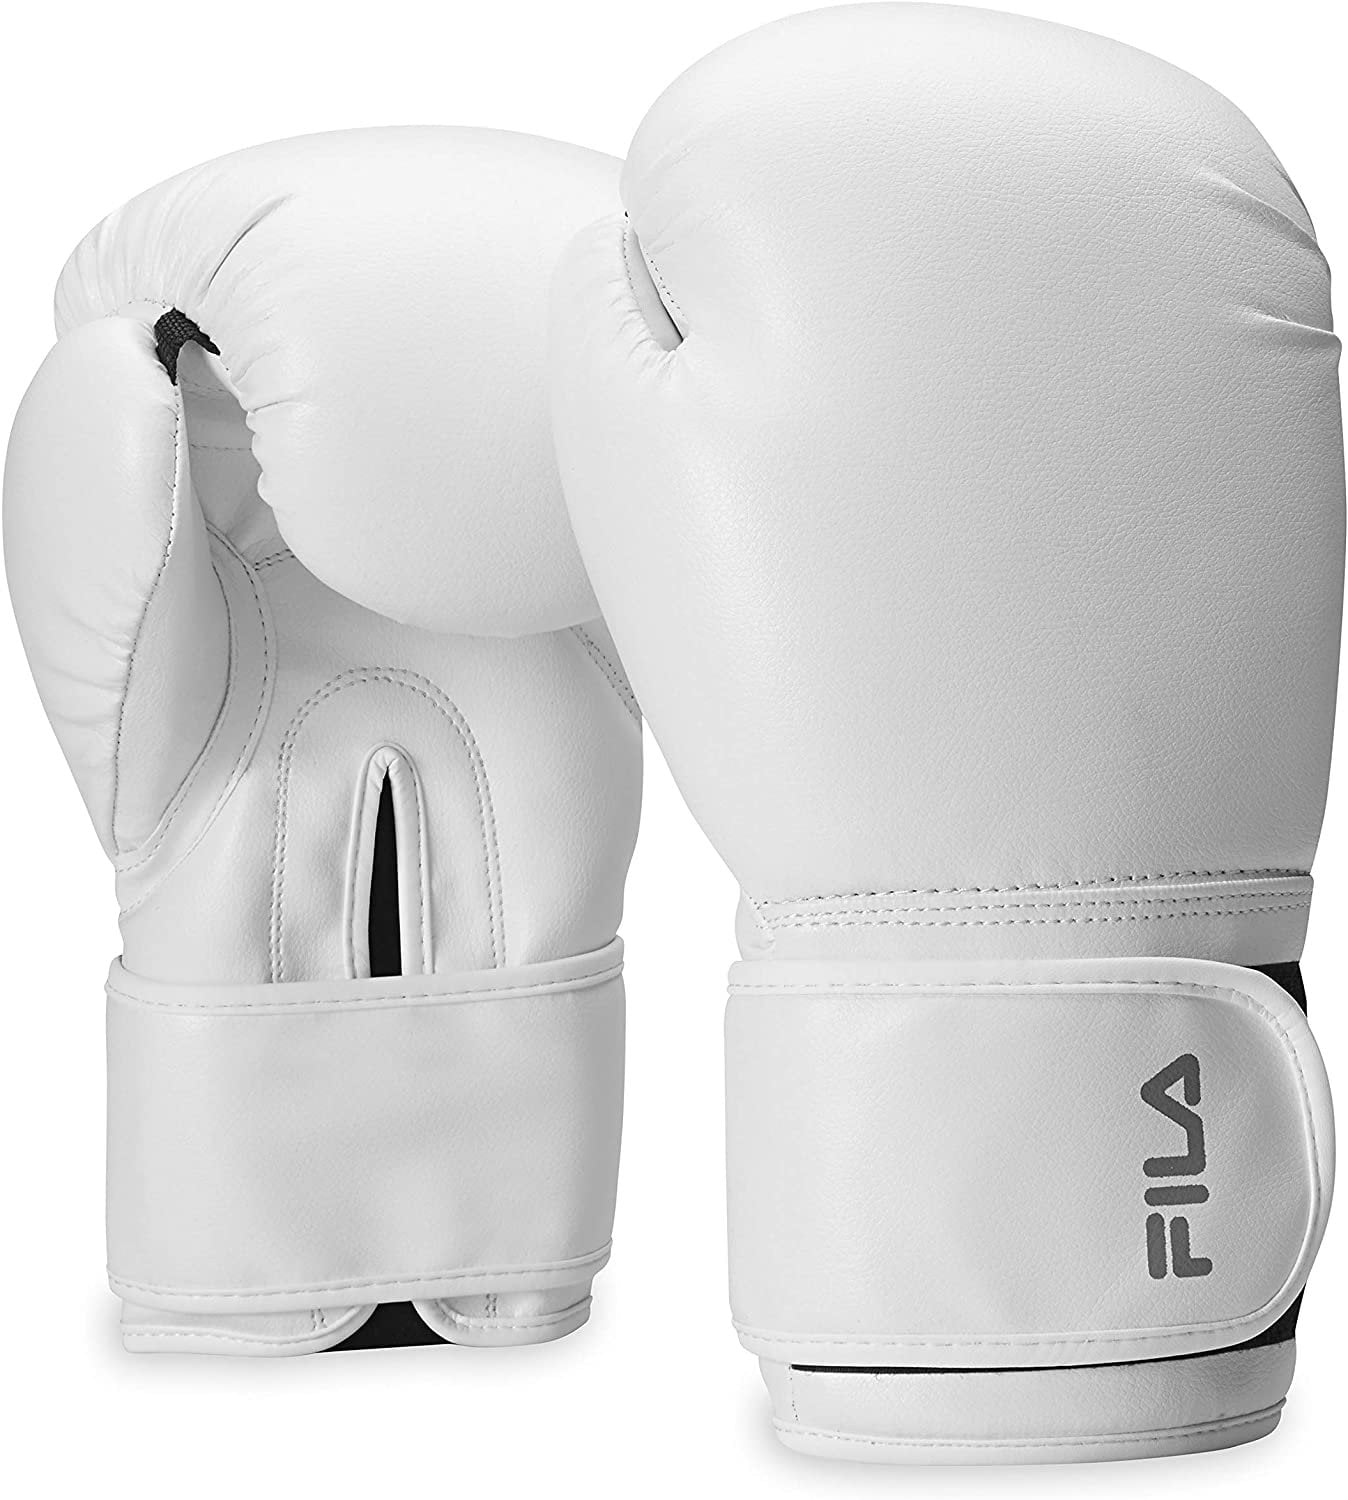 Professional Boxing Gloves Sparring Glove Punch Bag Training MMA Mitts Plain New 